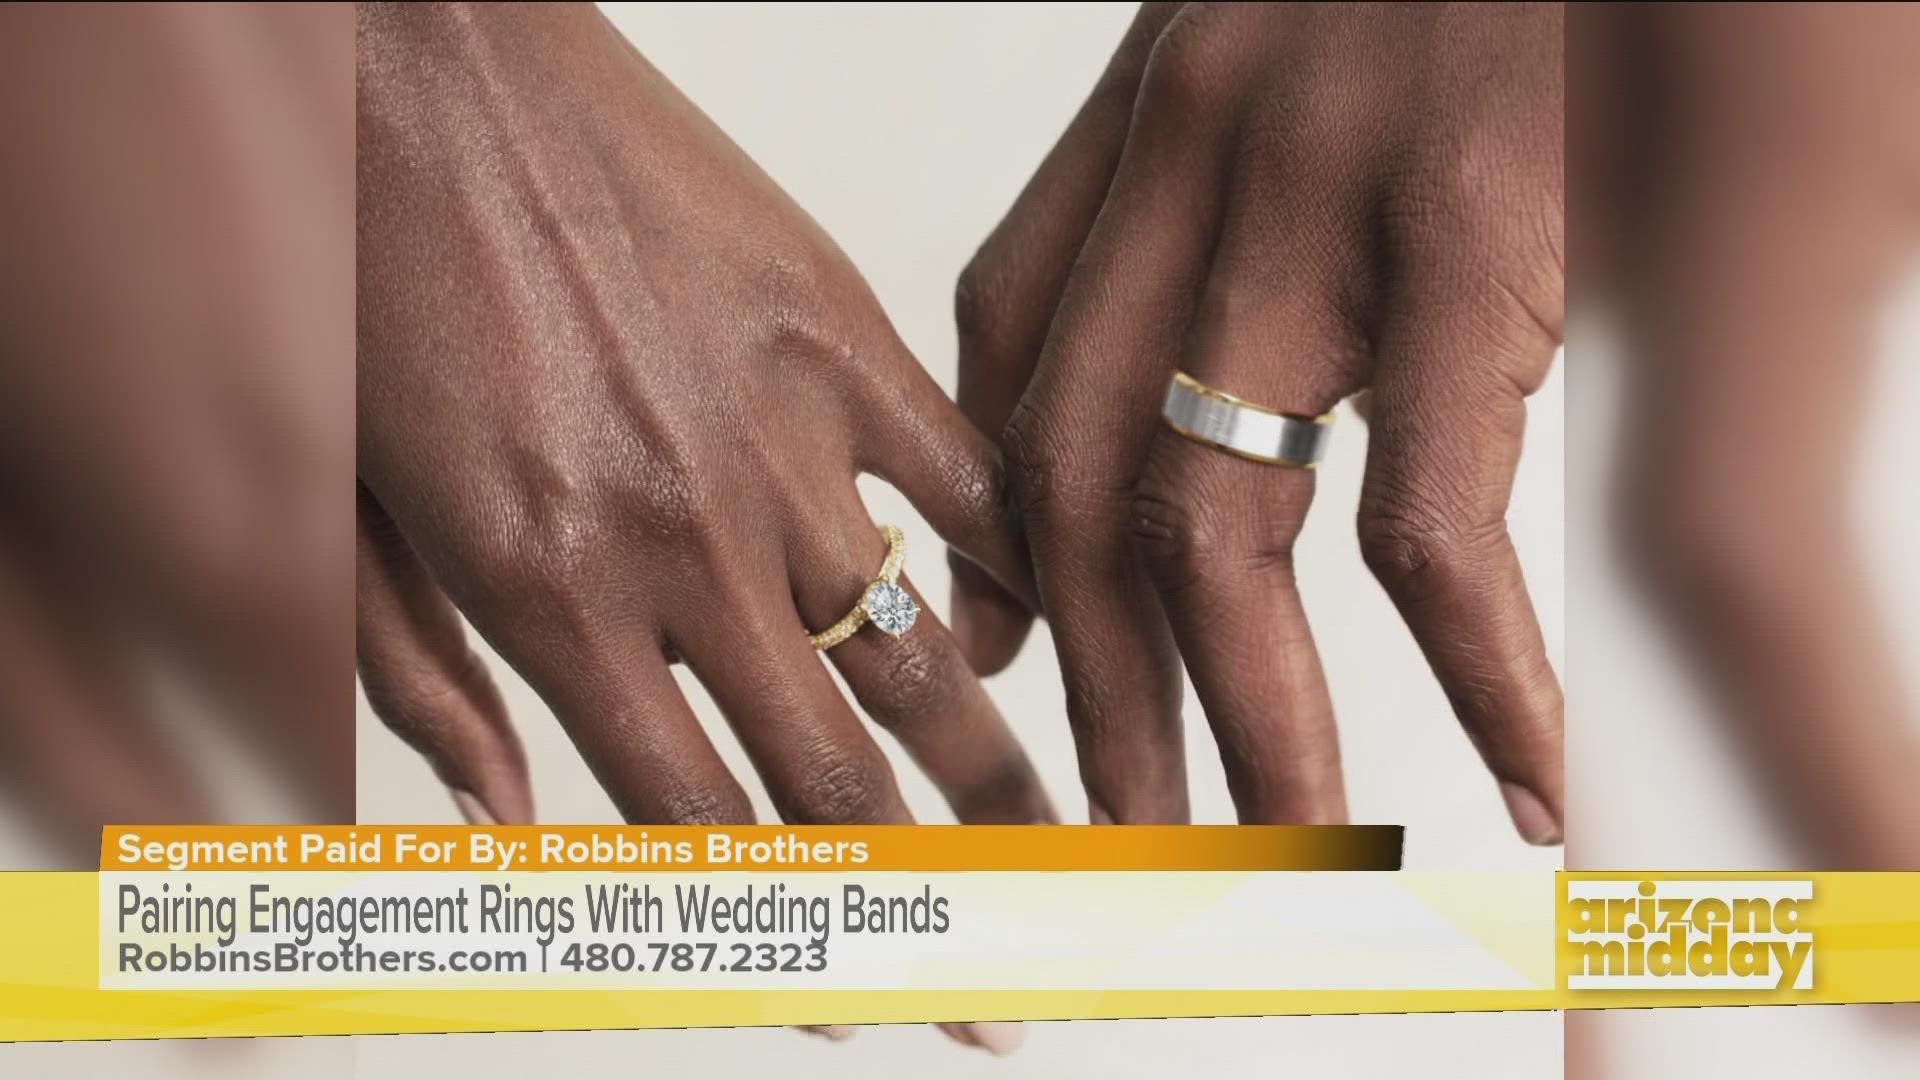 MJ Lamanilao with Robbins Brothers breaks down what we need to know when picking out a wedding band to go with your engagment ring.